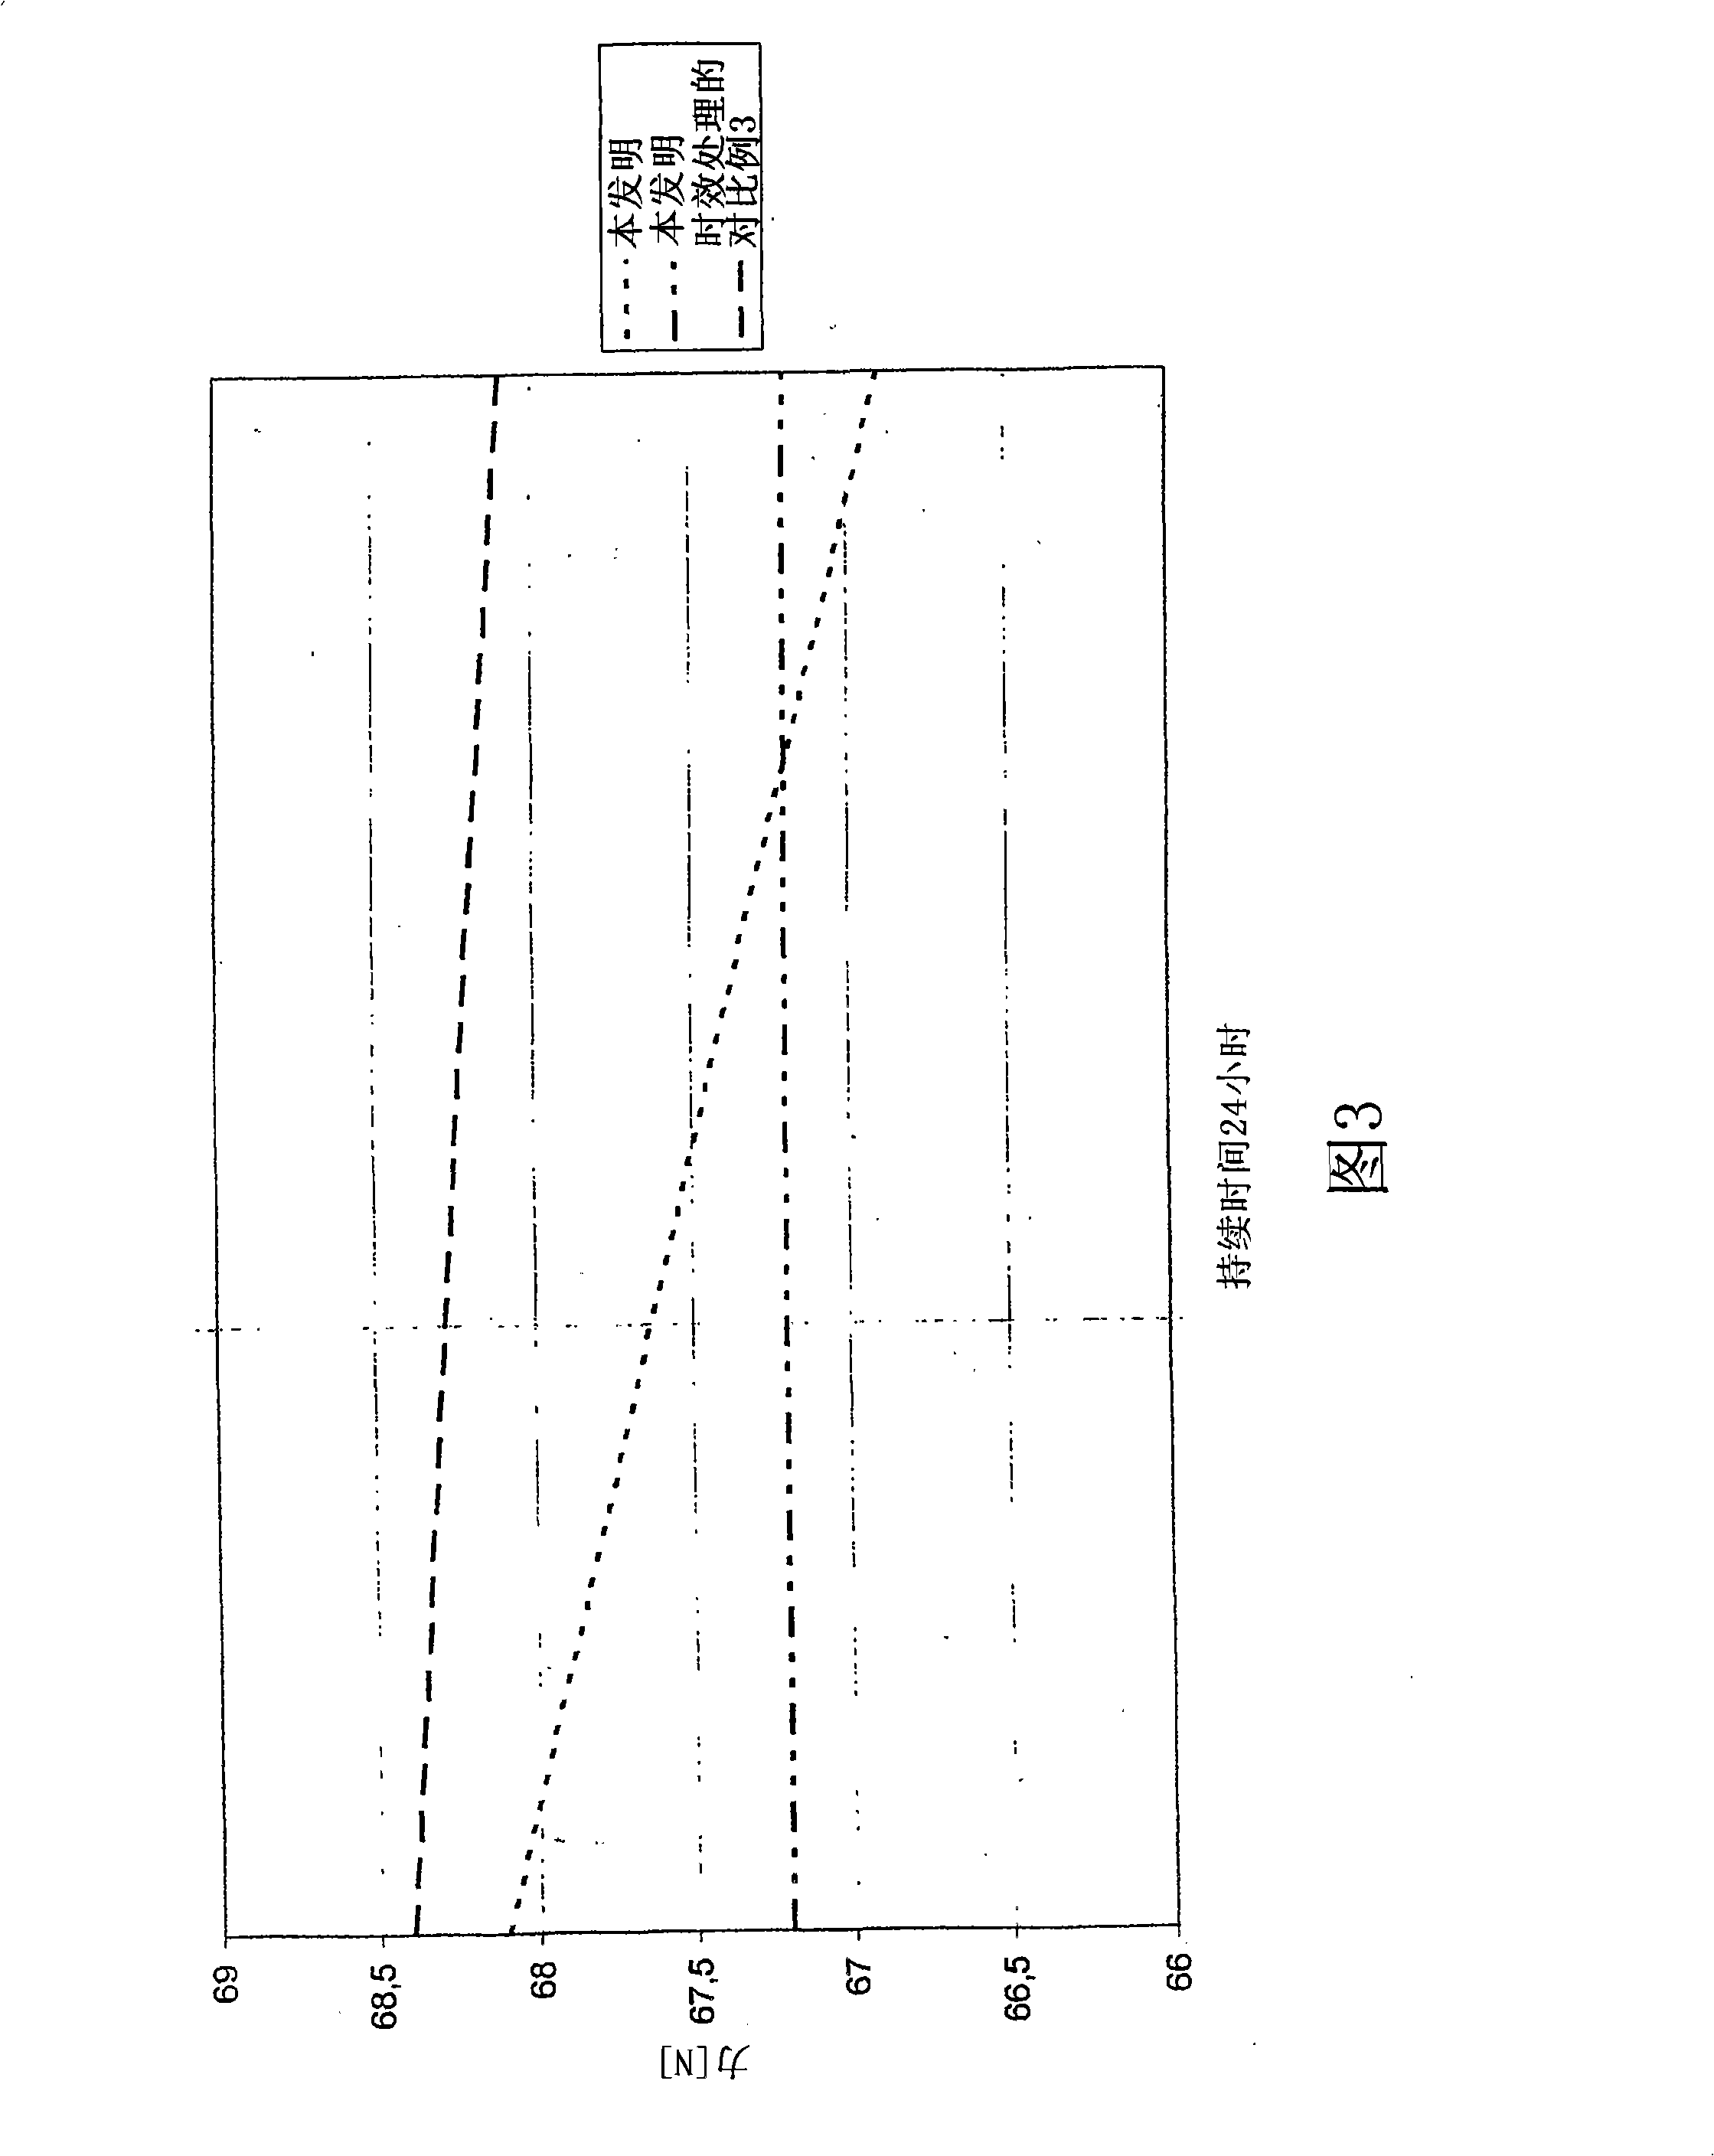 Music string and instrument comprising said string